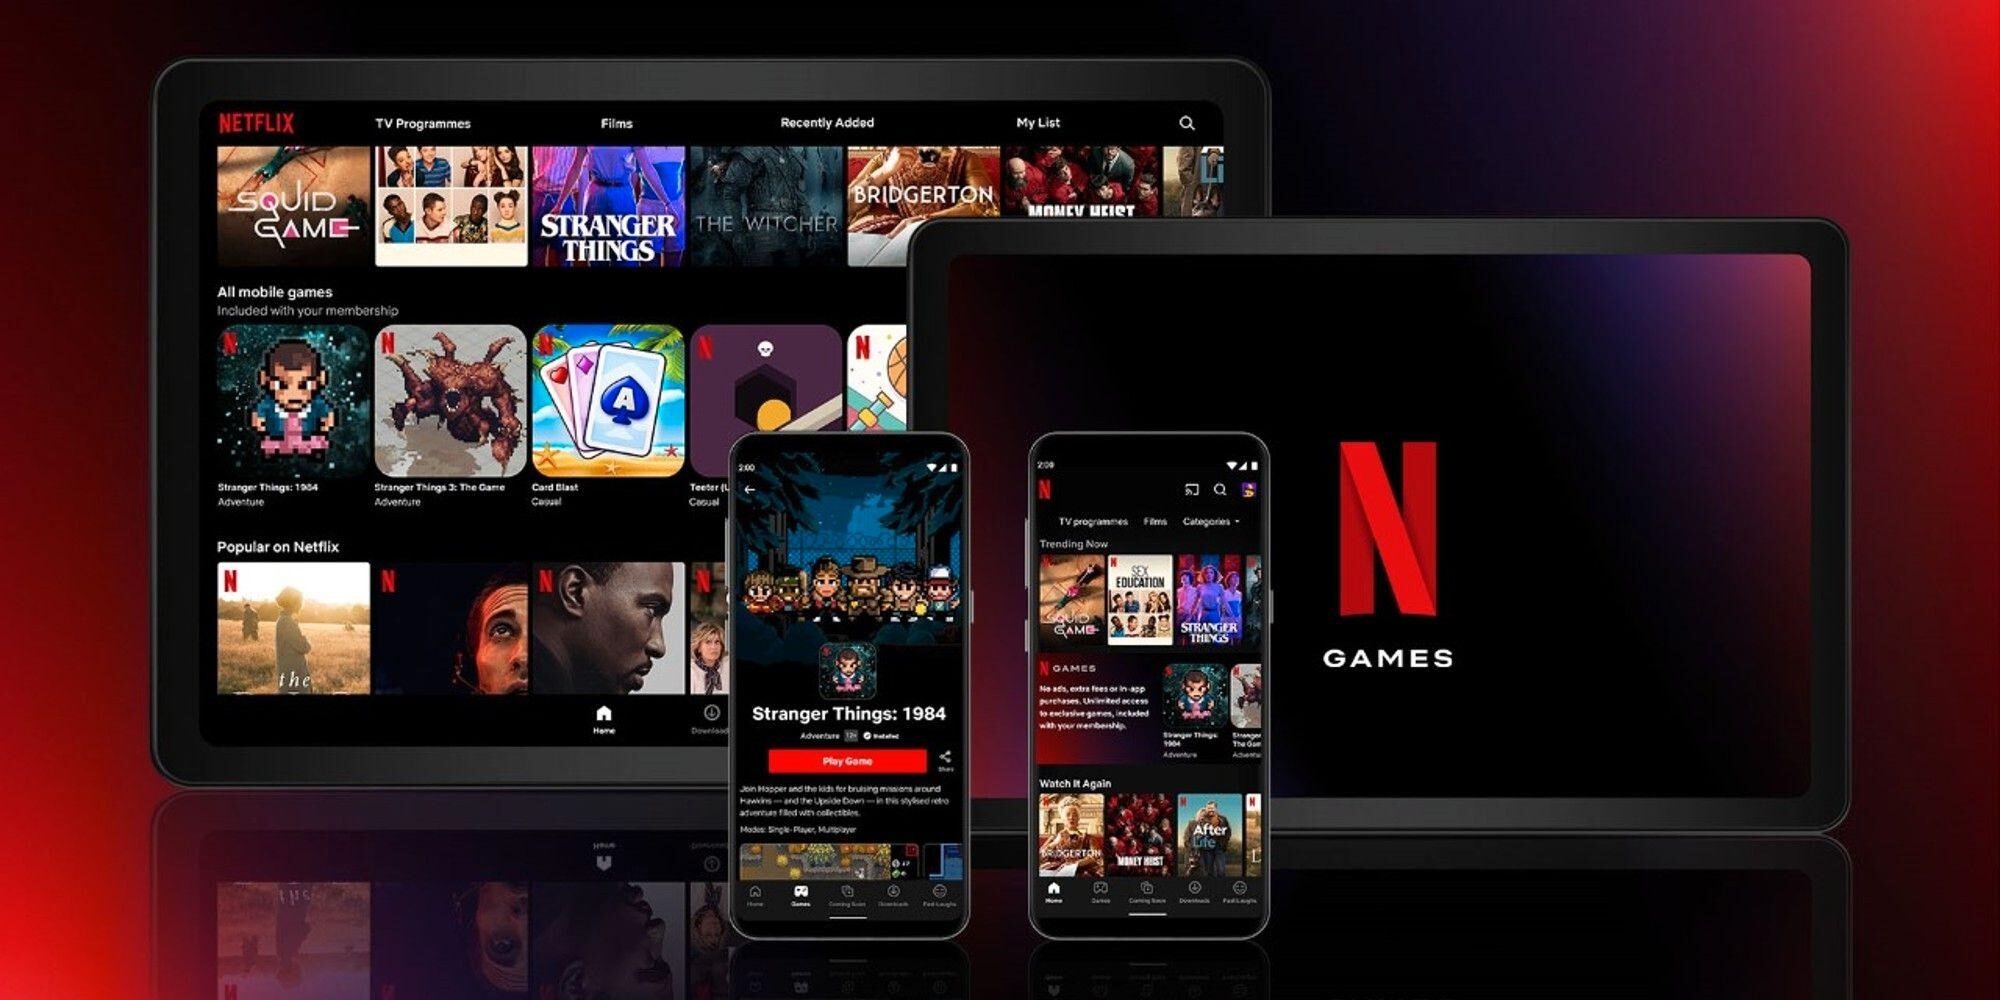 Netflix games are now available on iPhone and iPad